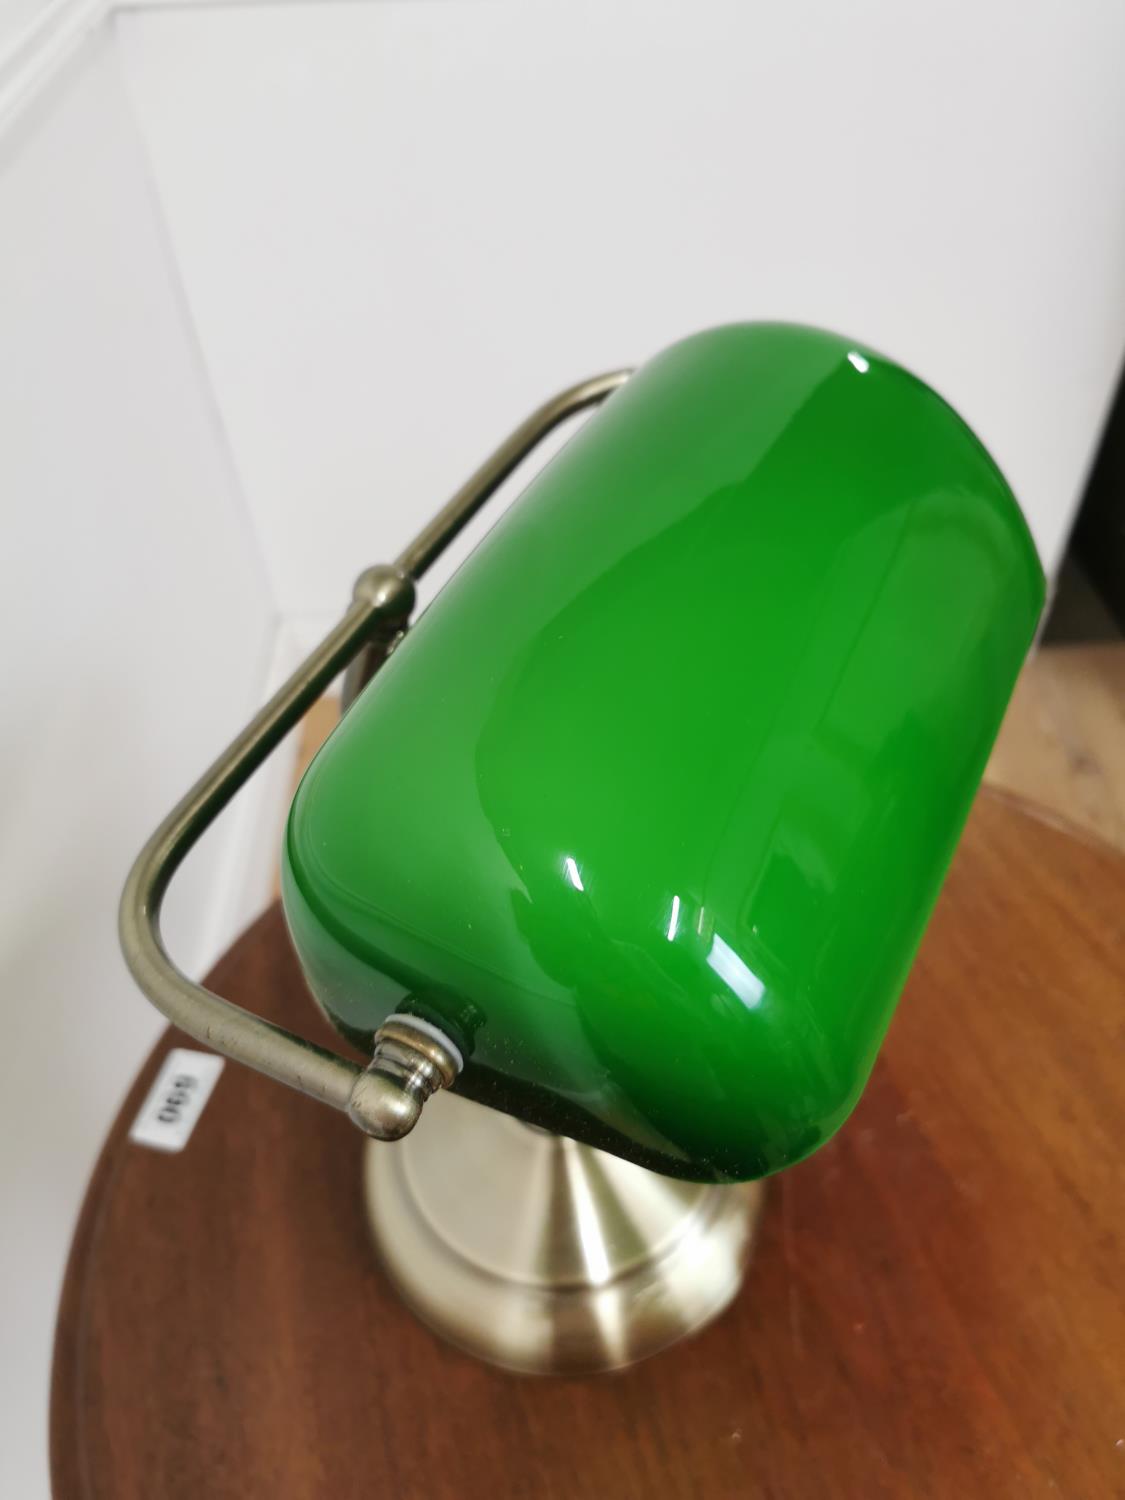 Banker's chrome desk lamp with green glass shade { 32cm H X 26cm W X 15cm D }. - Image 3 of 3